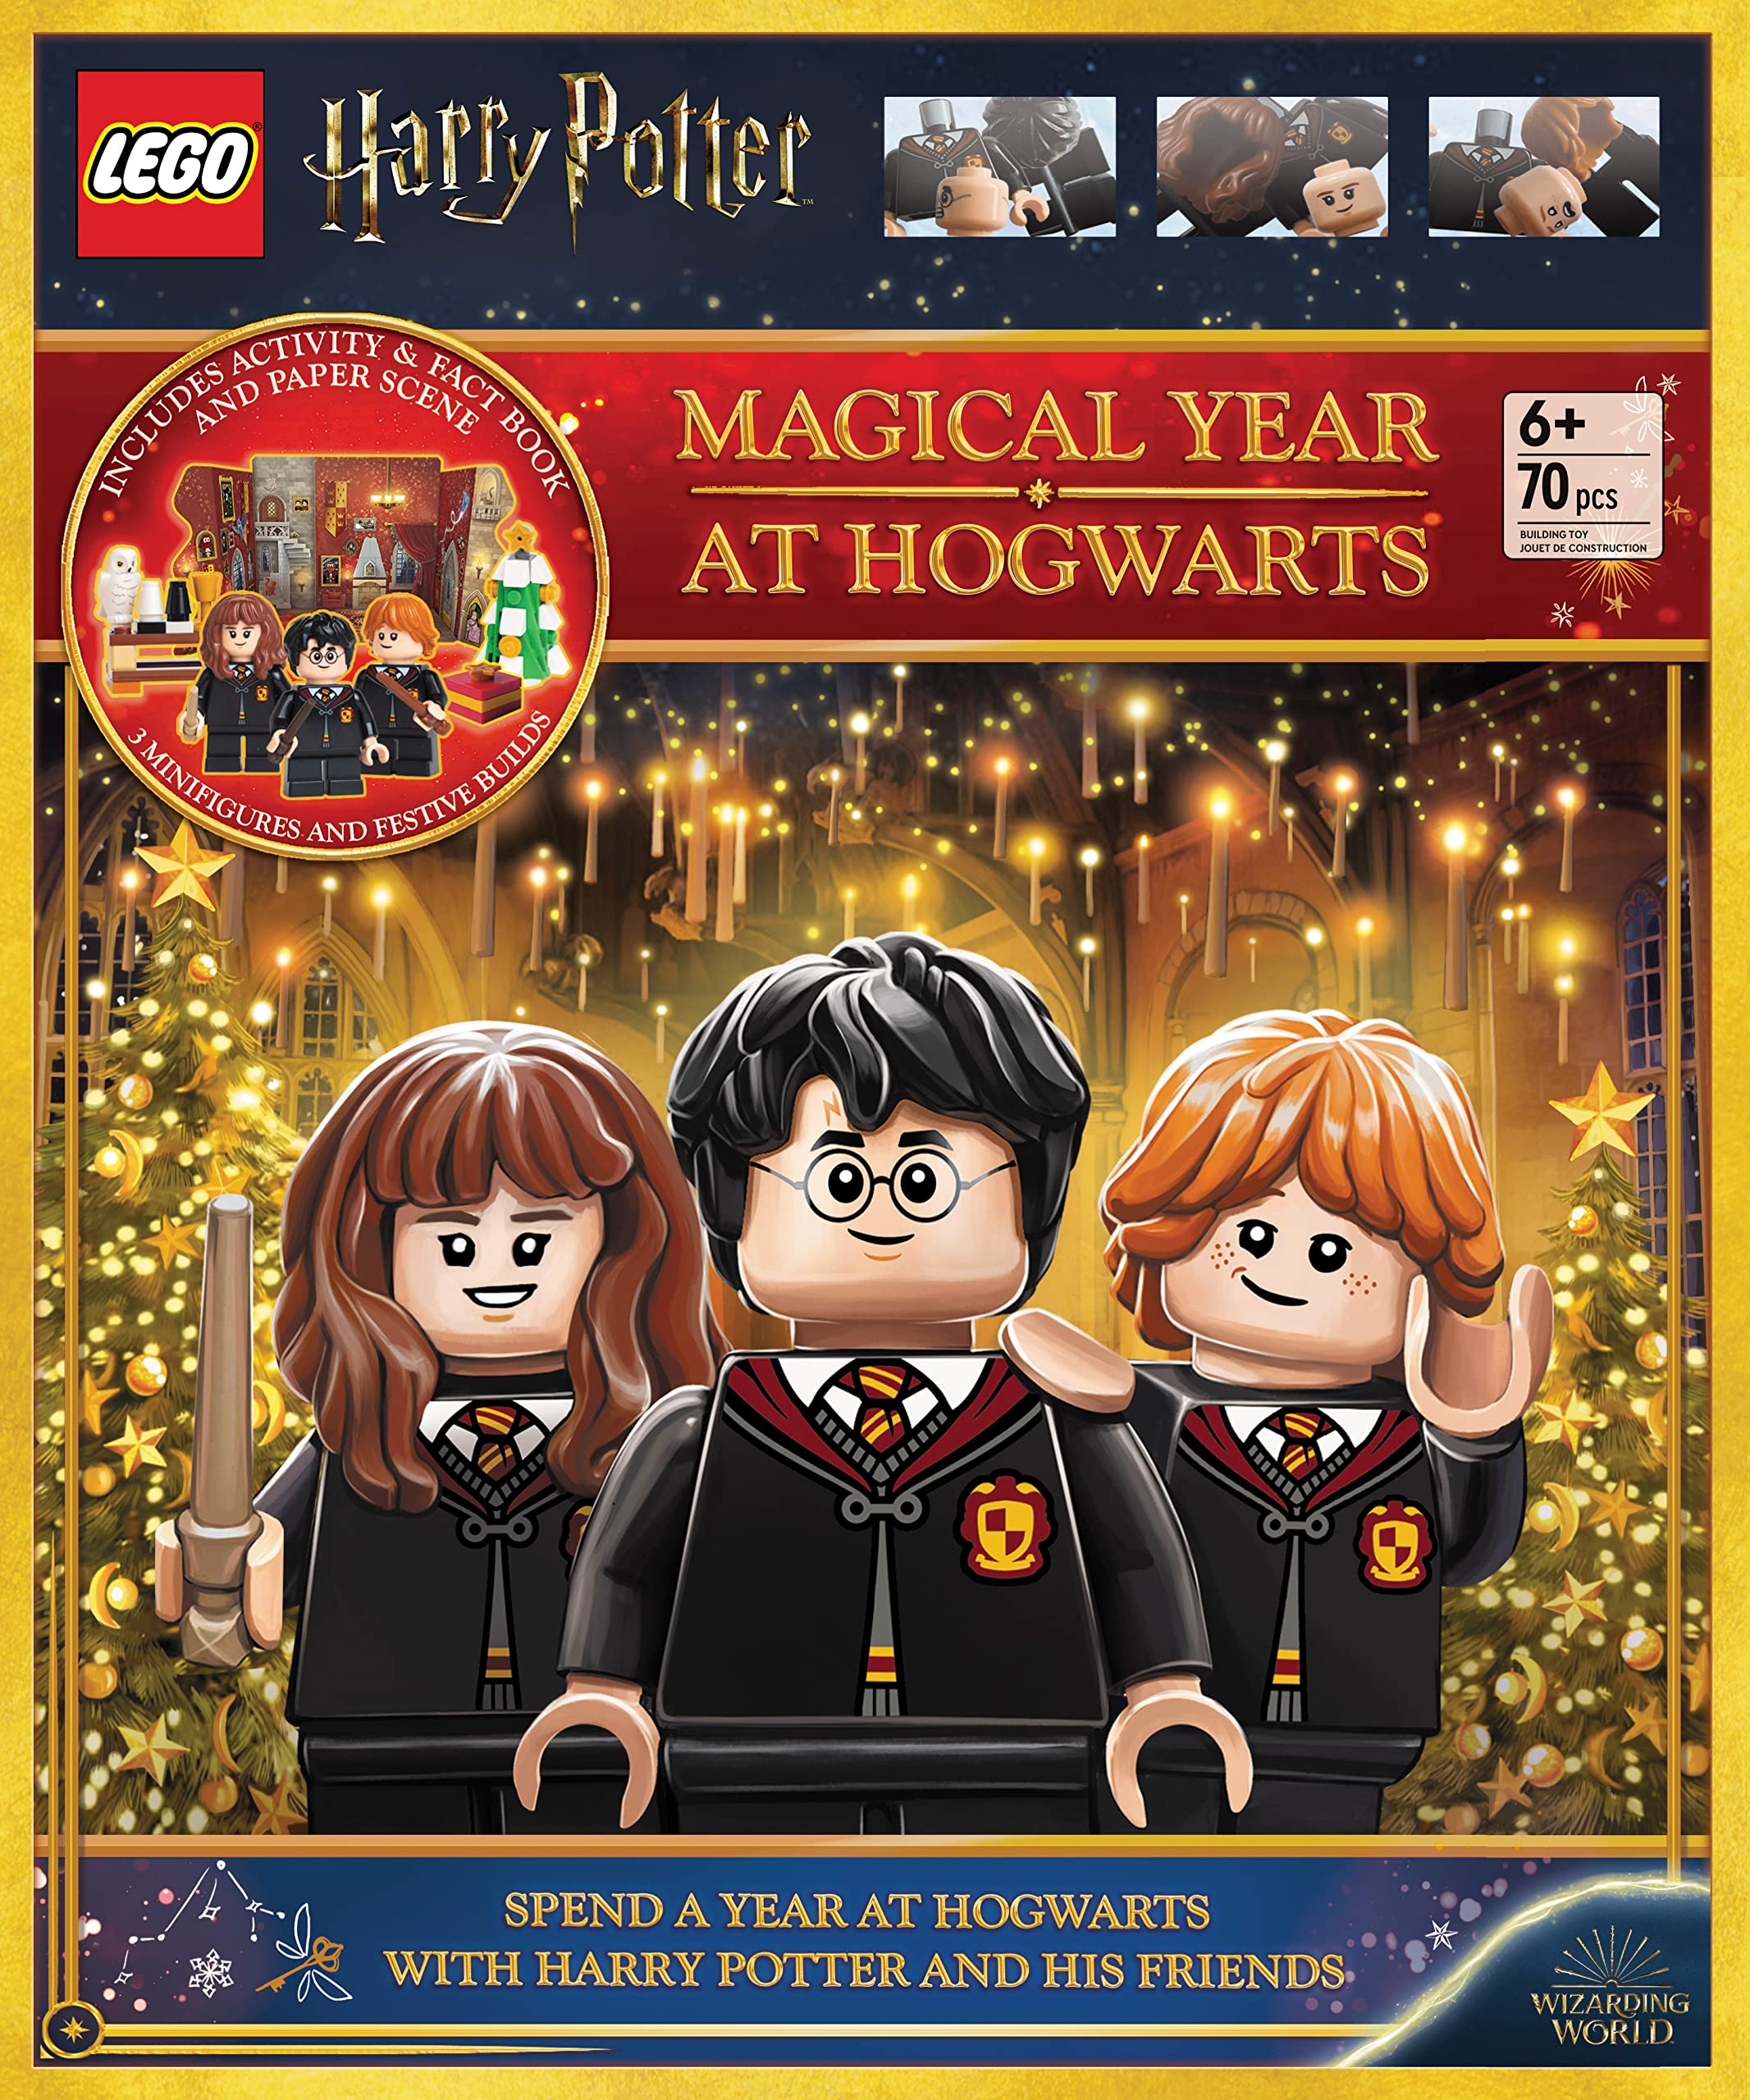 LEGO(R) Harry Potter(TM) Magical Year at Hogwarts: Christmas Activity Book with Fun Facts, Play Scene, Basic Brick Kit, and 3 LEGO(R) Minifigures to Inspire Imagination and Creativity!